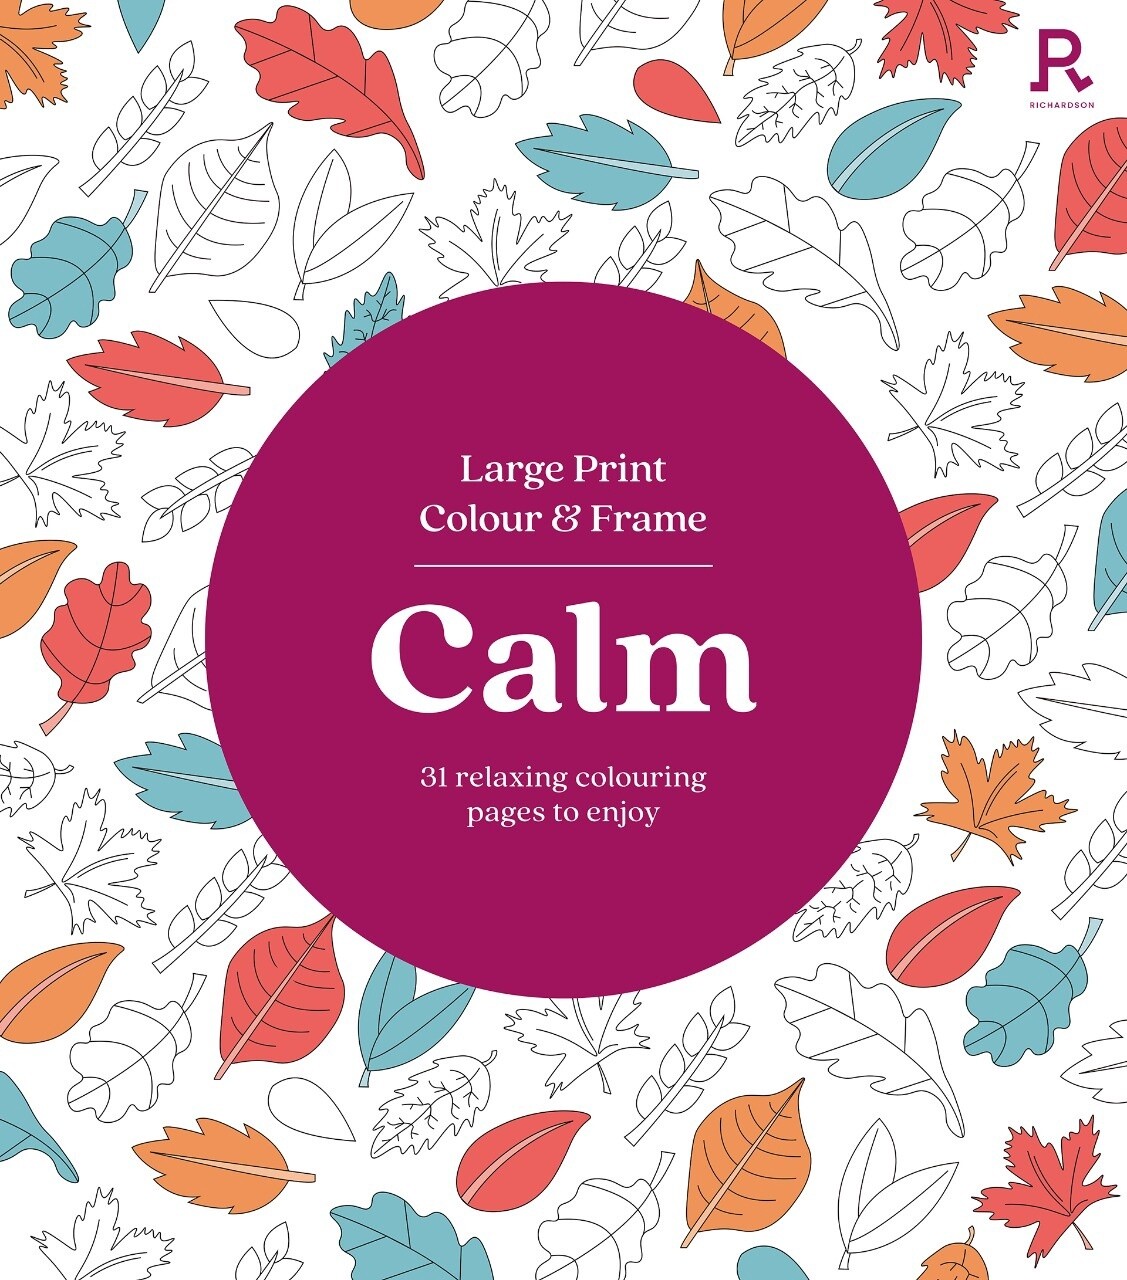 Calm: Large Print Colour and Frame